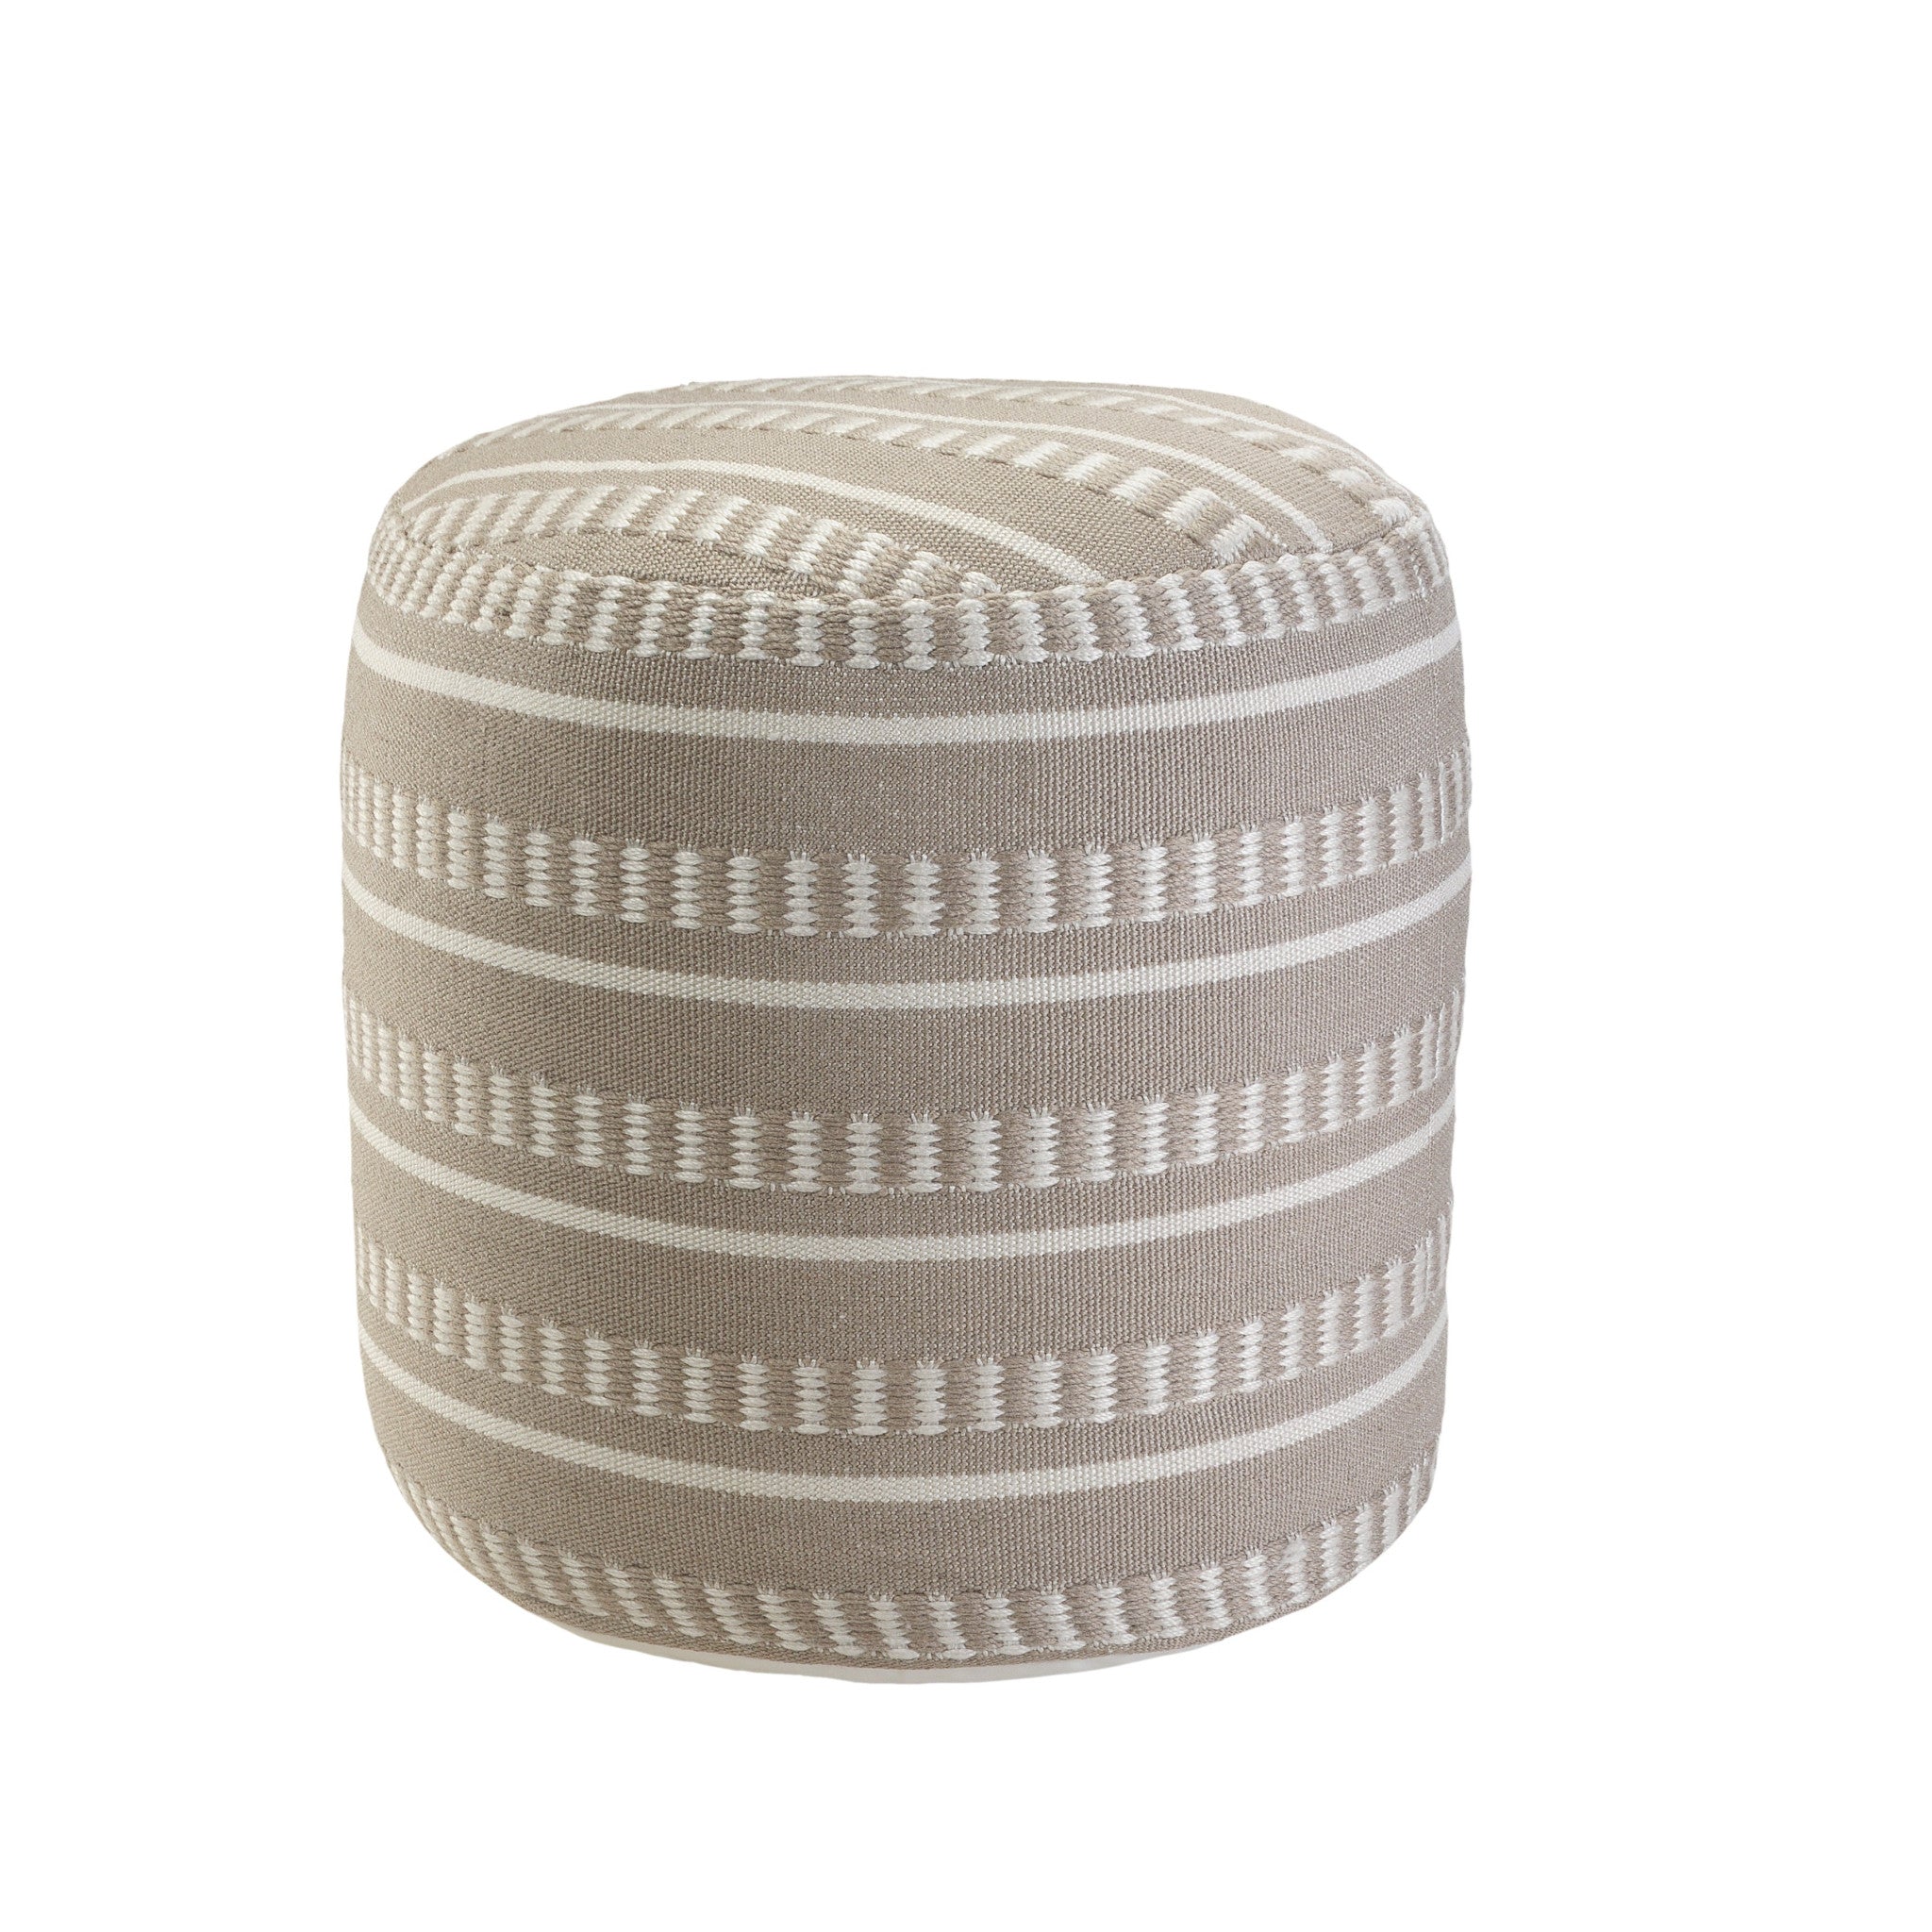 20" Brown Polyester Round Striped Indoor Outdoor Pouf Ottoman